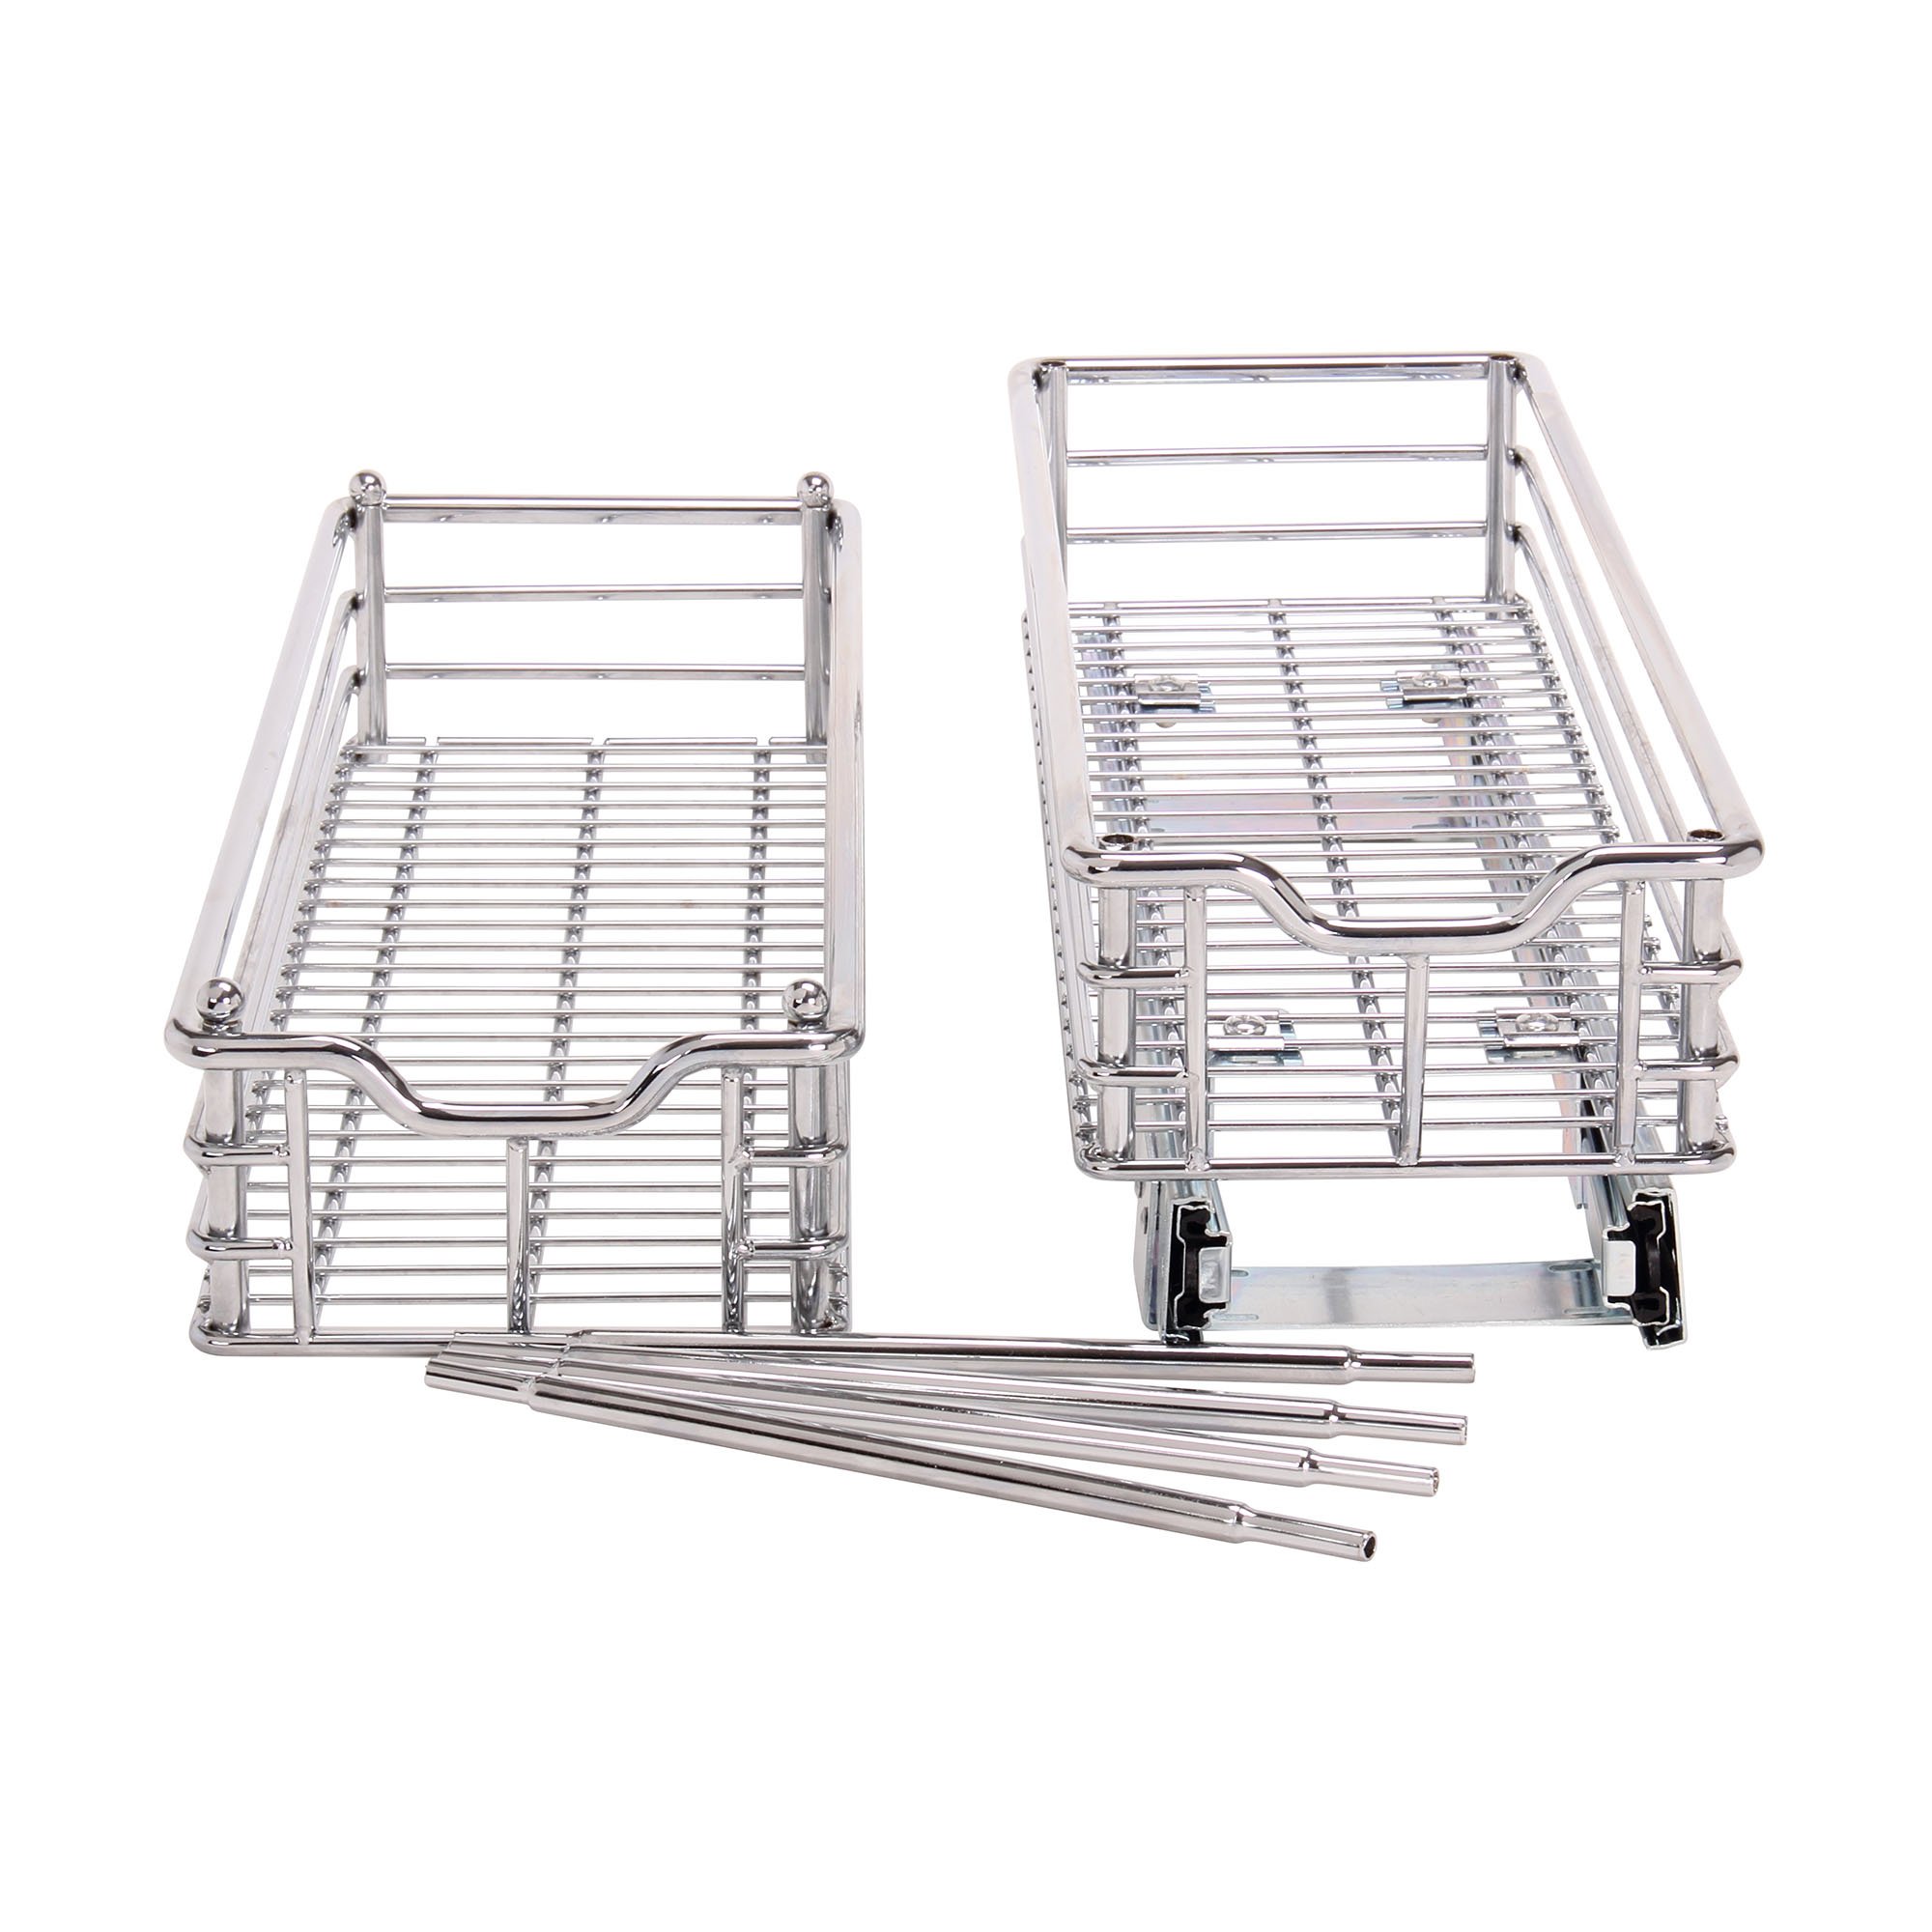 Household Essentials Narrow Sliding Cabinet Organizers (7" and 5"), Two Tier Chrome Organizers, Great for Slim Kitchen and Bathroom Cabinets